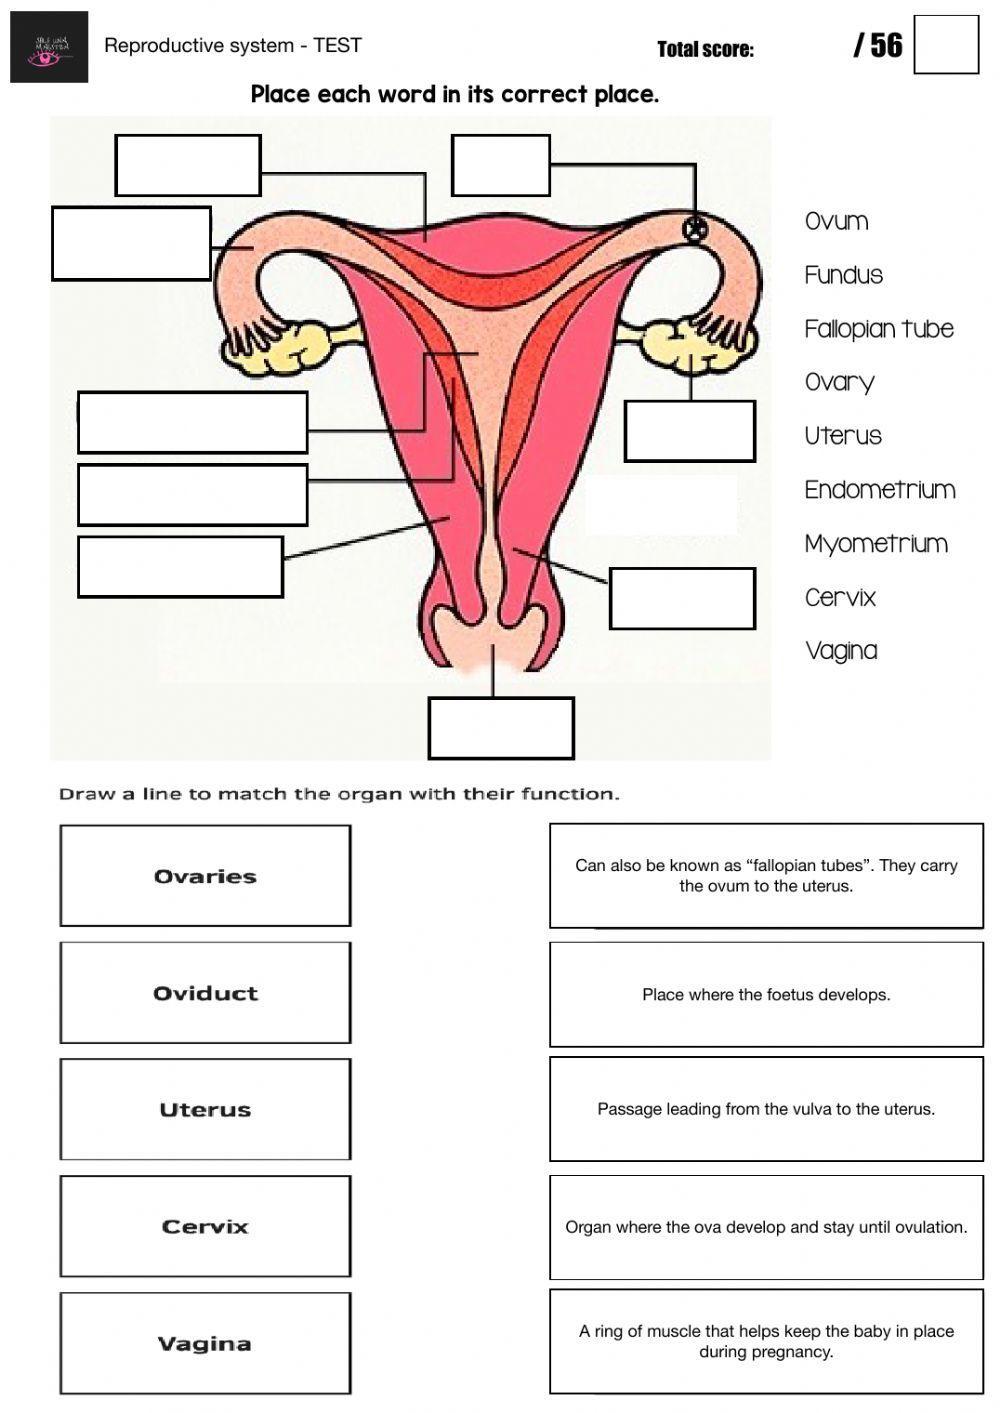 Reproductive system - TEST